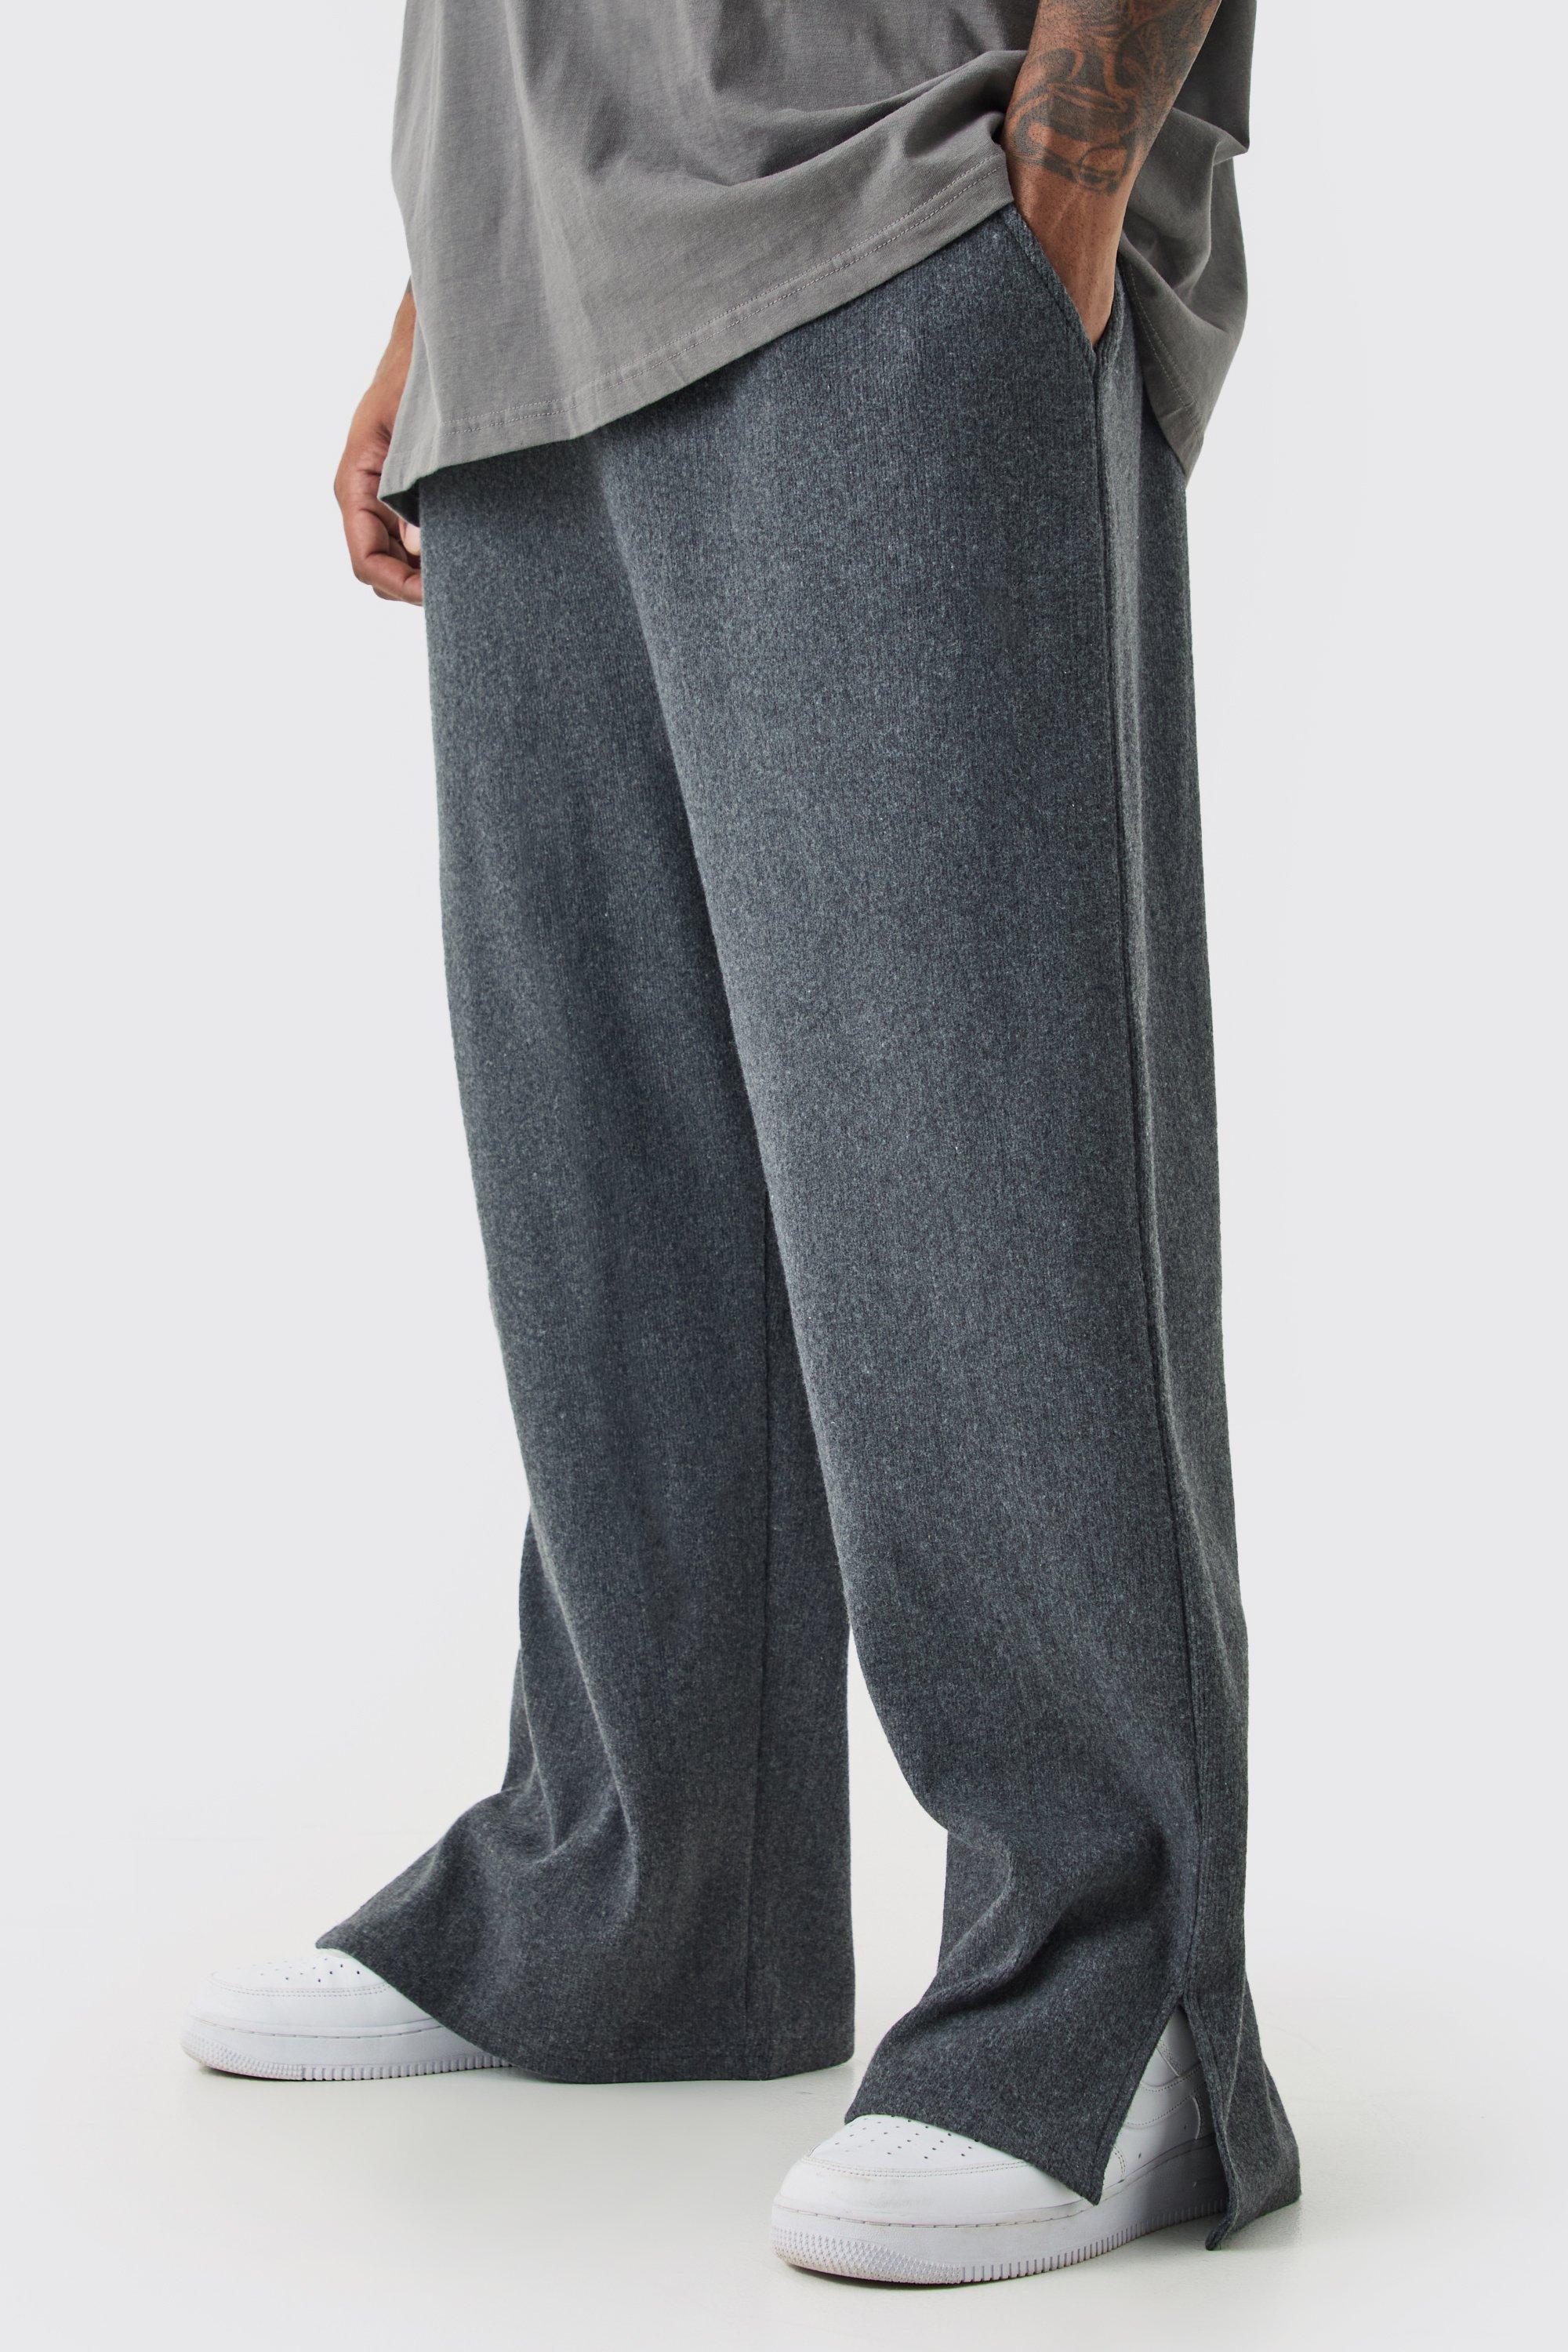 Prom Collection High Waisted Big & Tall Joggers & Sweatpants.